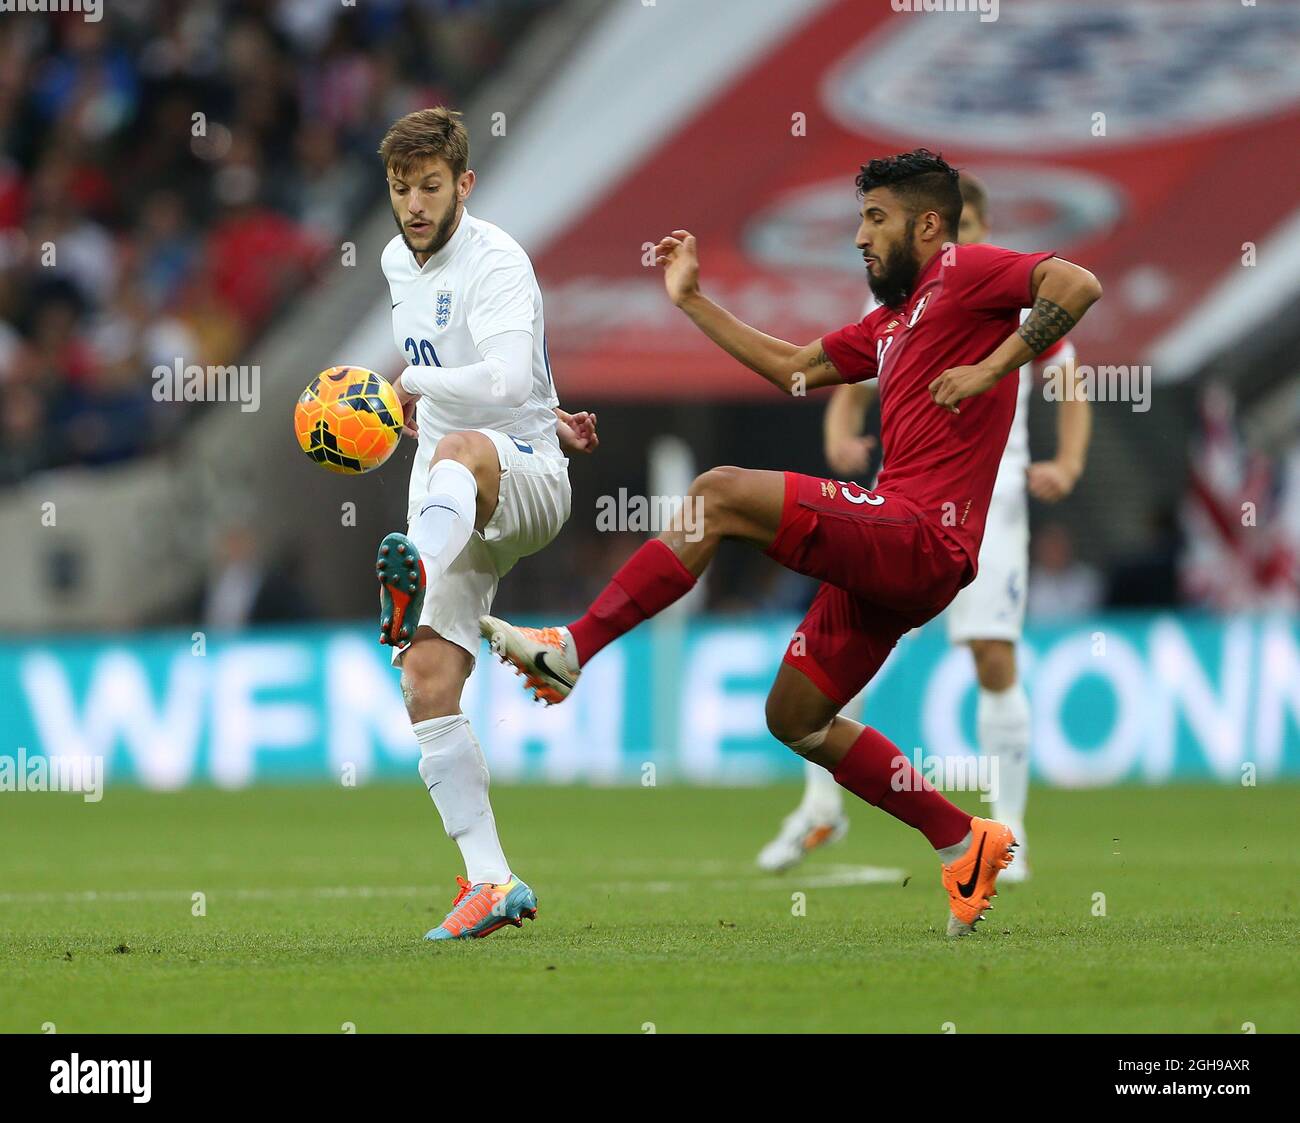 England's Adam Lallana tussles with Peru's Josepmir Ballon during the international friendly match between England and Peru at Wembley Stadium on May 30, 2014 in London, England. Pic Charlie Forgham-Bailey/Sportimage. Stock Photo